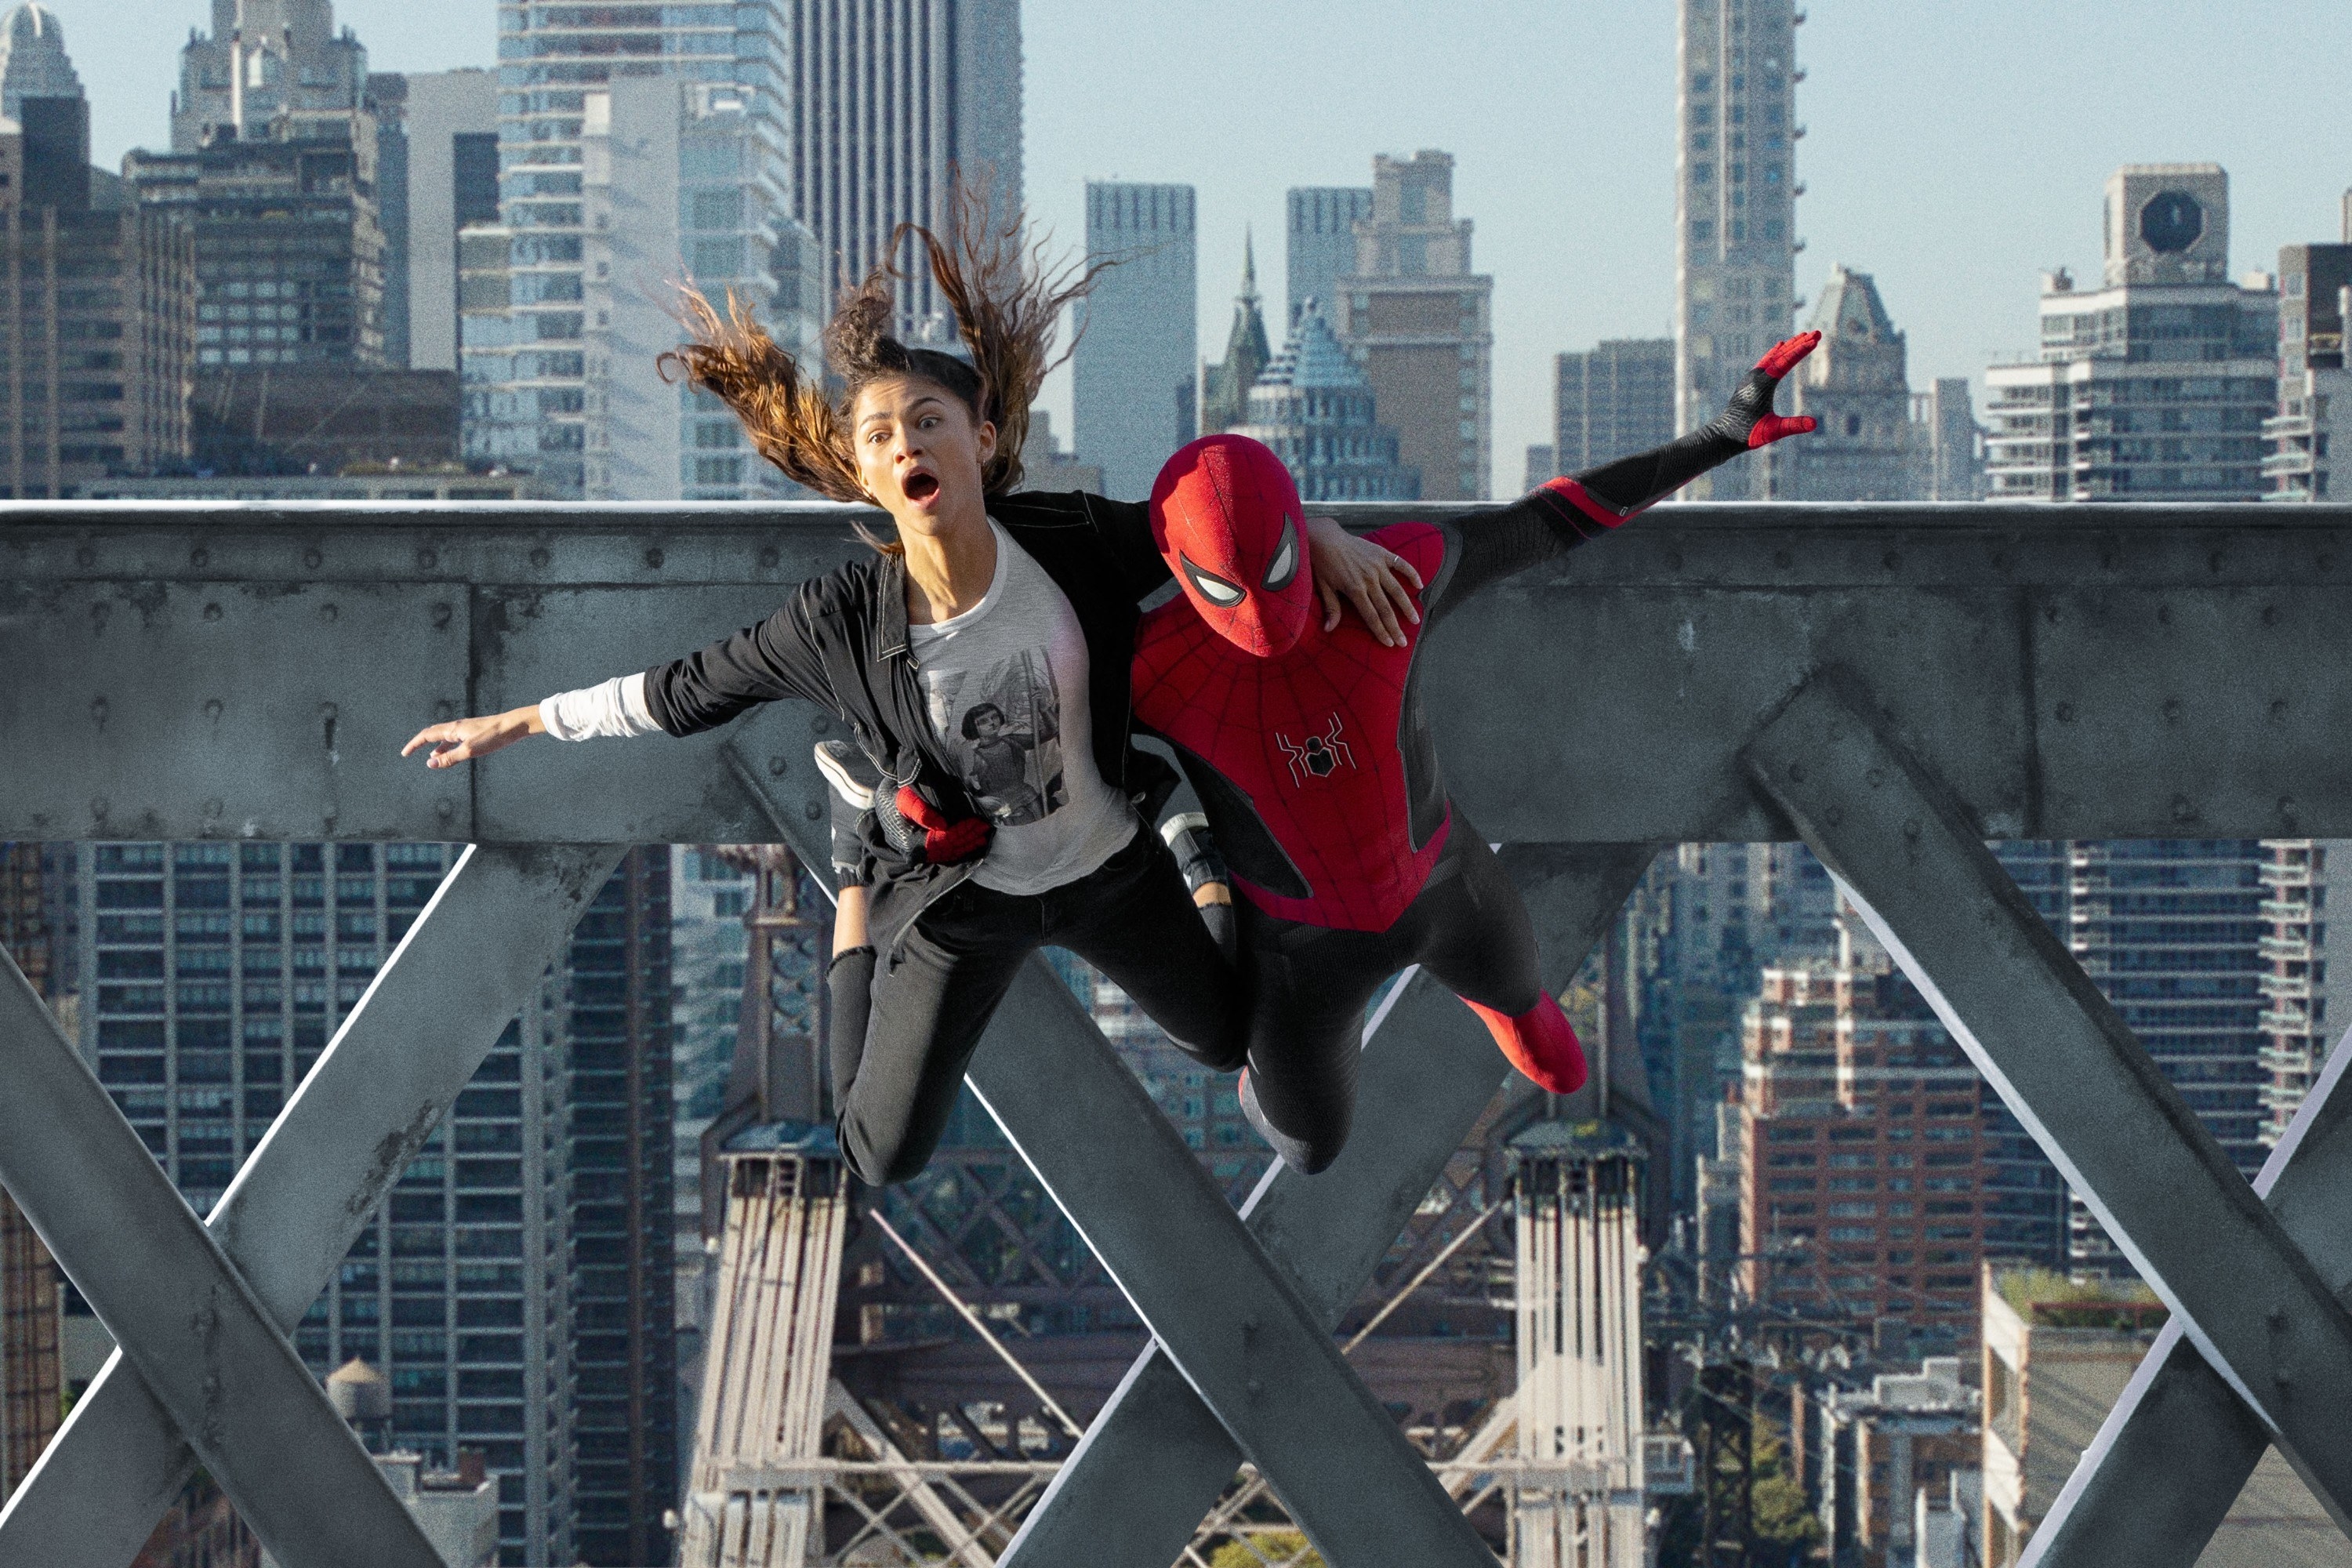 Zendaya falling from a bridge with Tom Holland as Spider-Man